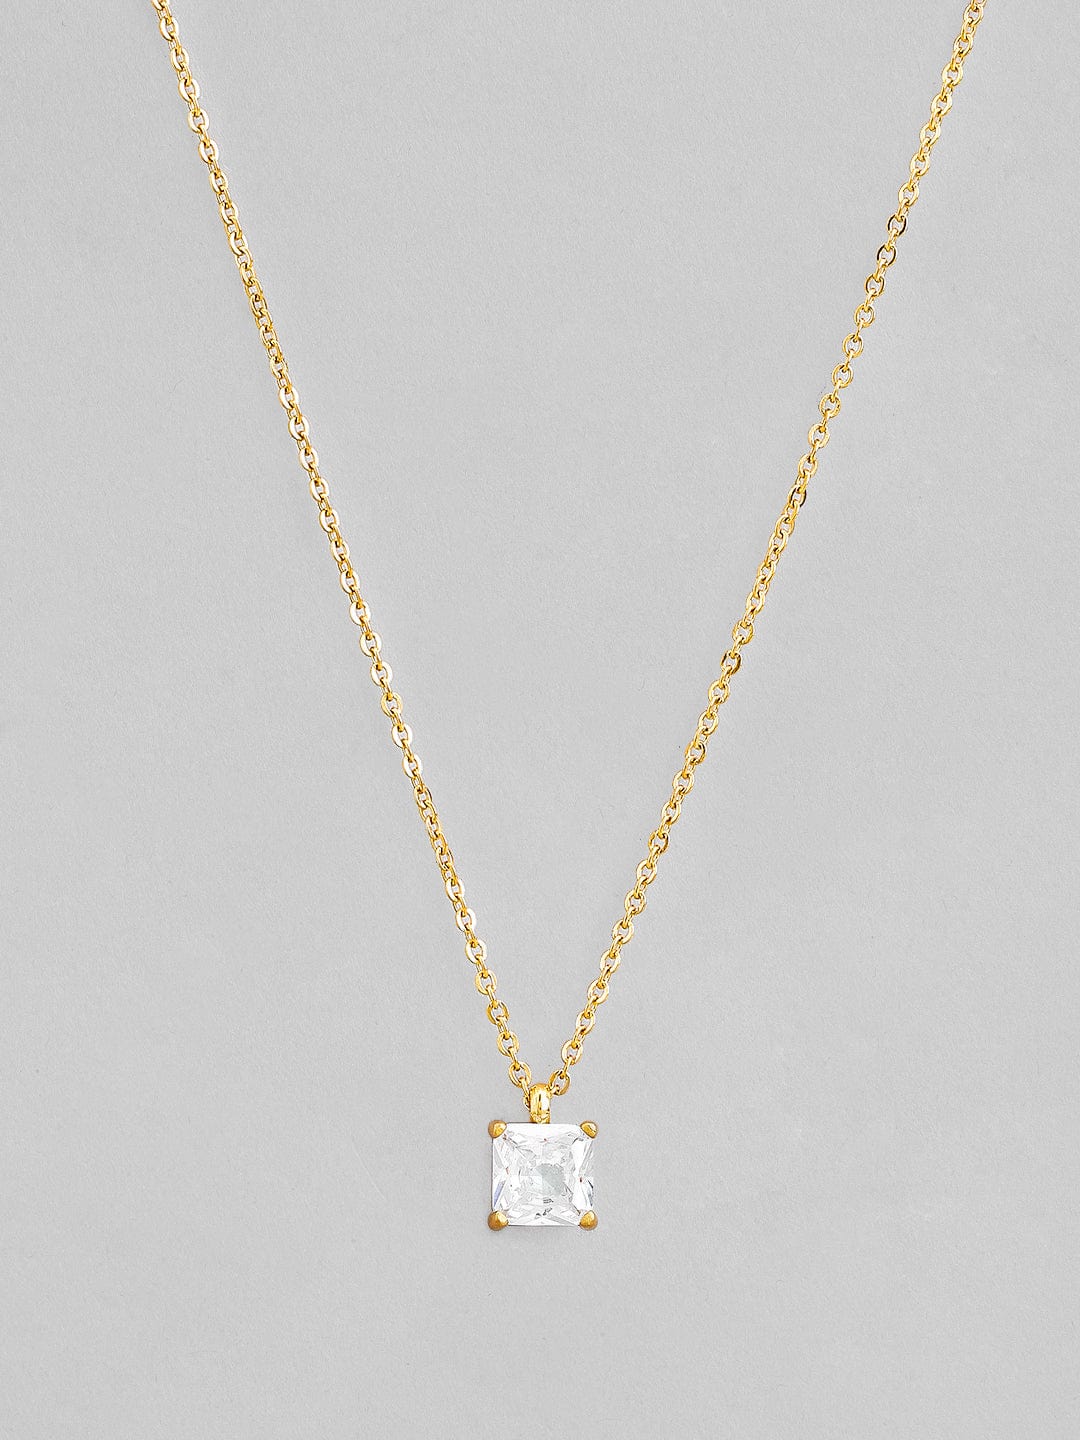 Rubans Voguish 18K Gold Plated Stainless Steel Waterproof Chain With Solitaire Stone Pendant. Chain & Necklaces